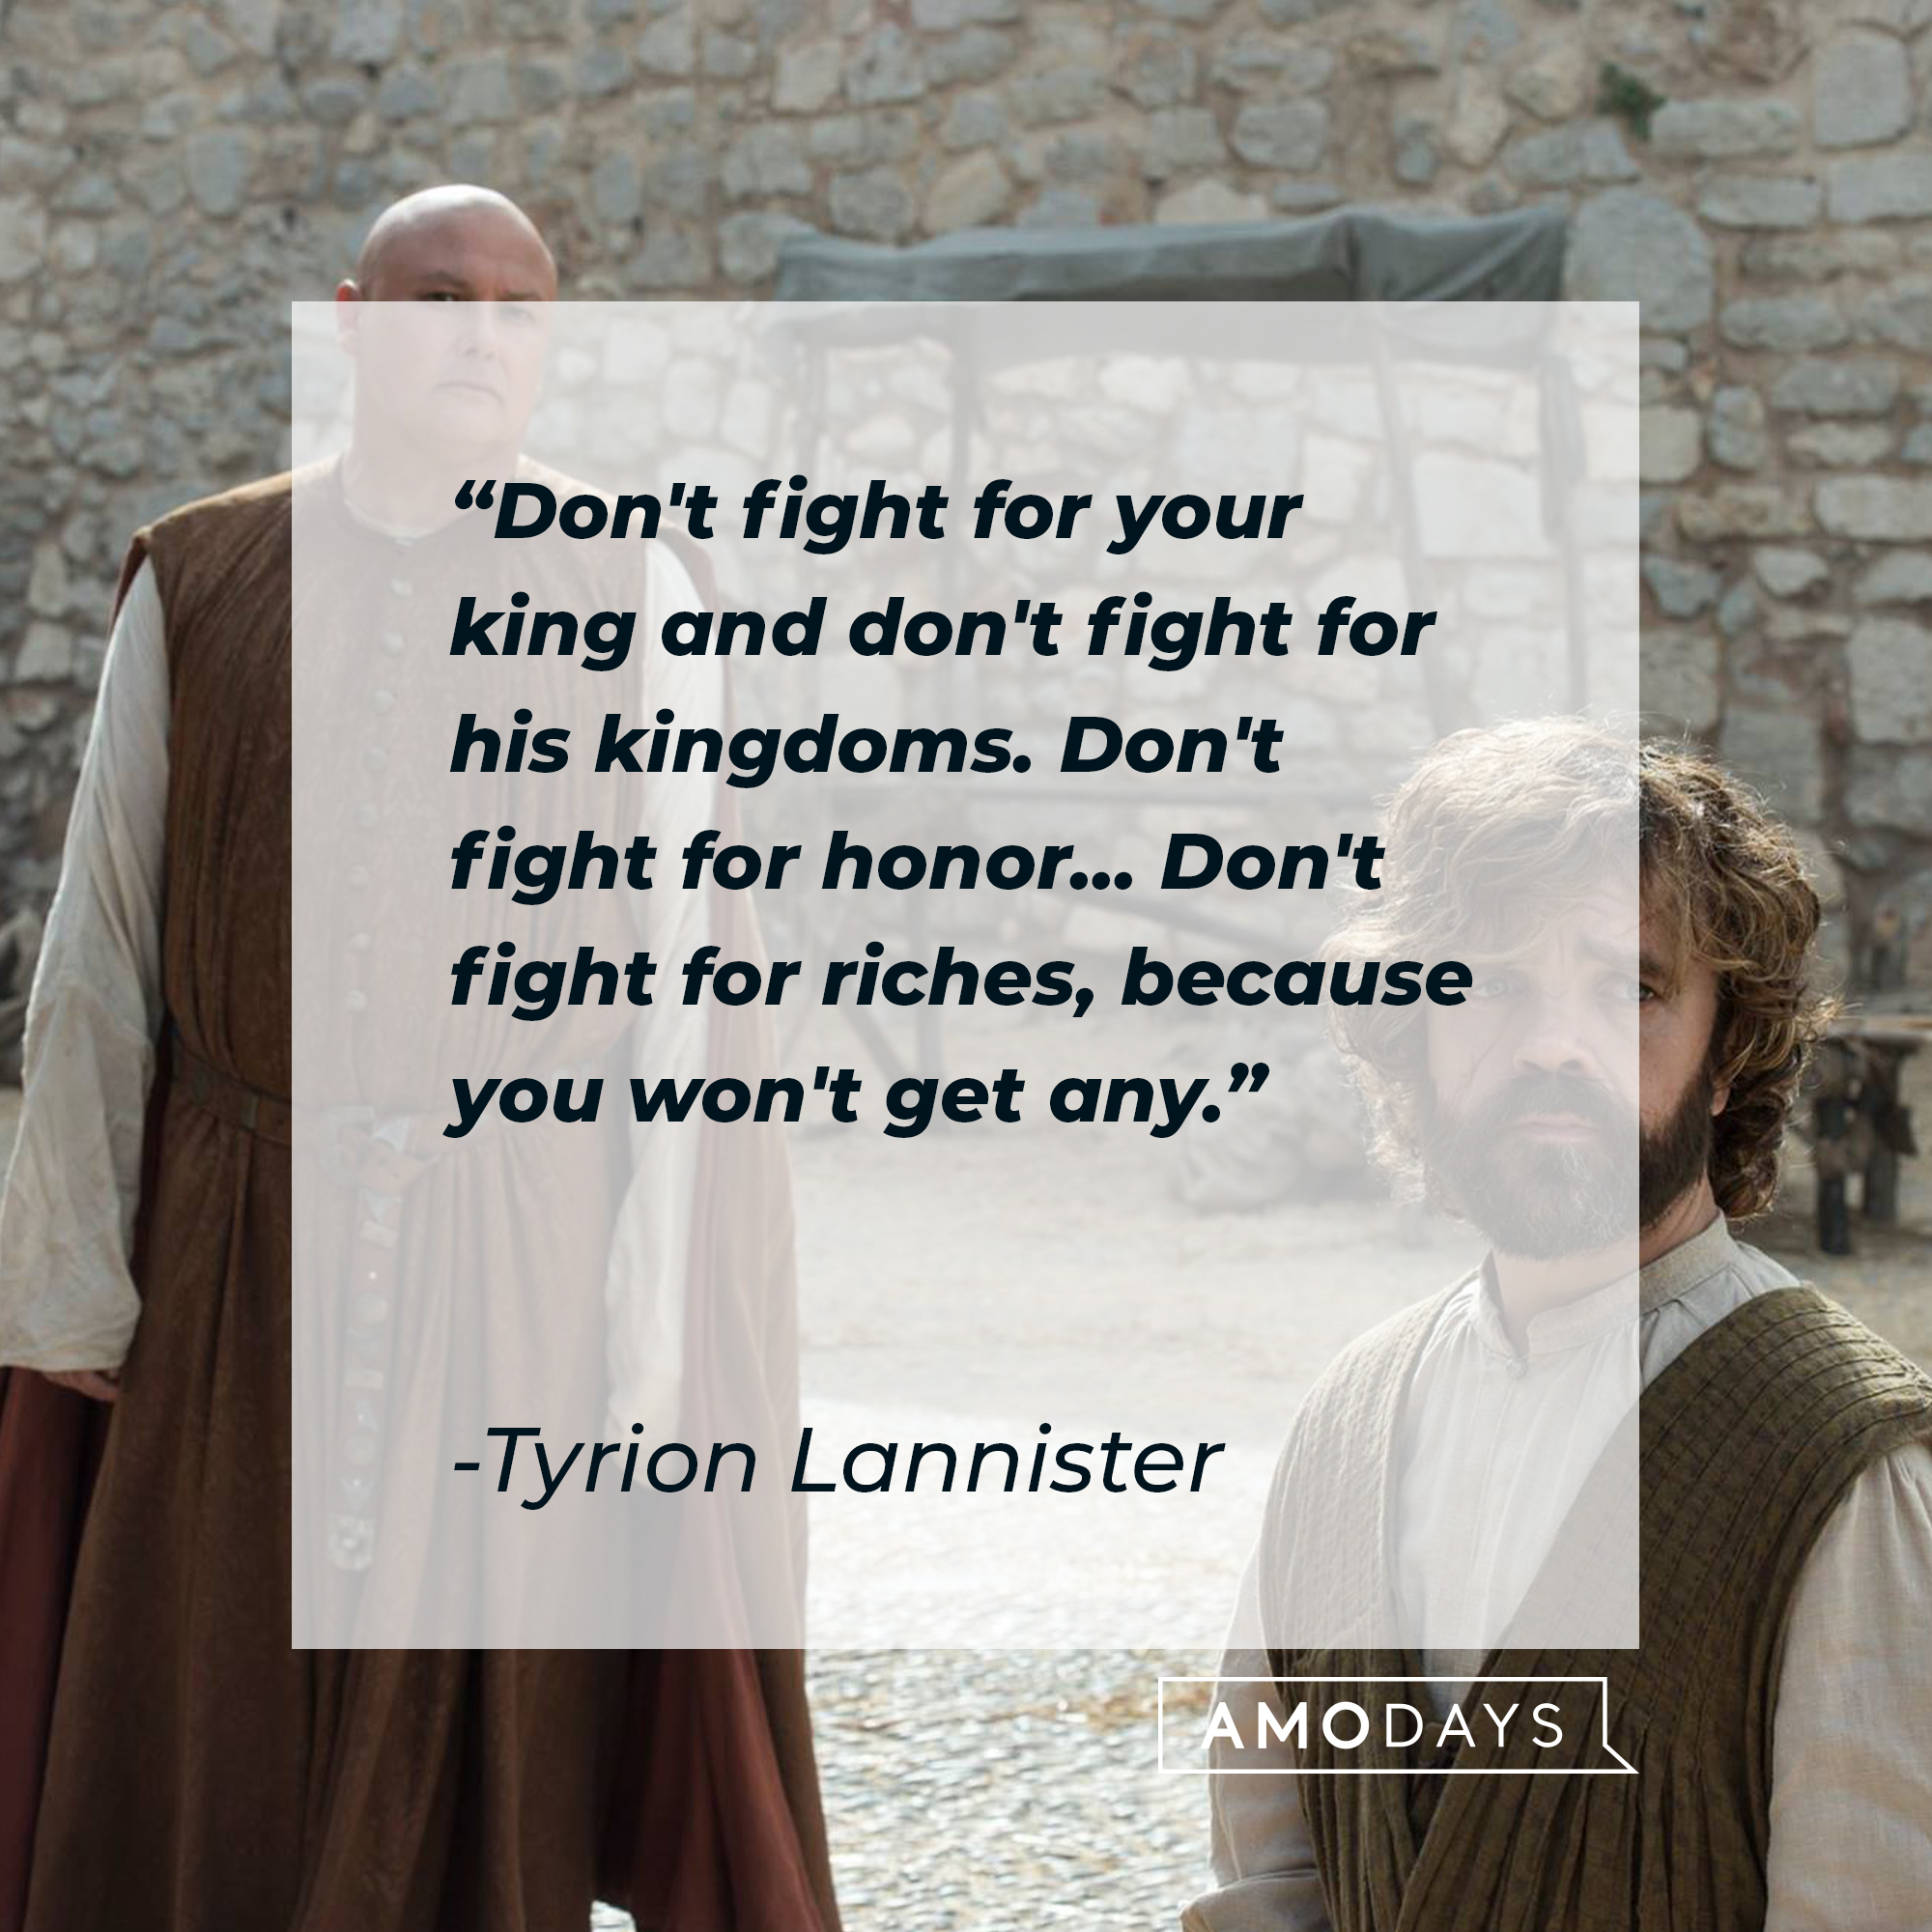 Tyrion Lannister's quote: “Don't fight for your king and don't fight for his kingdoms. Don't fight for honor... Don't fight for riches, because you won't get any.” | Source: facebook.com/GameOfThrones